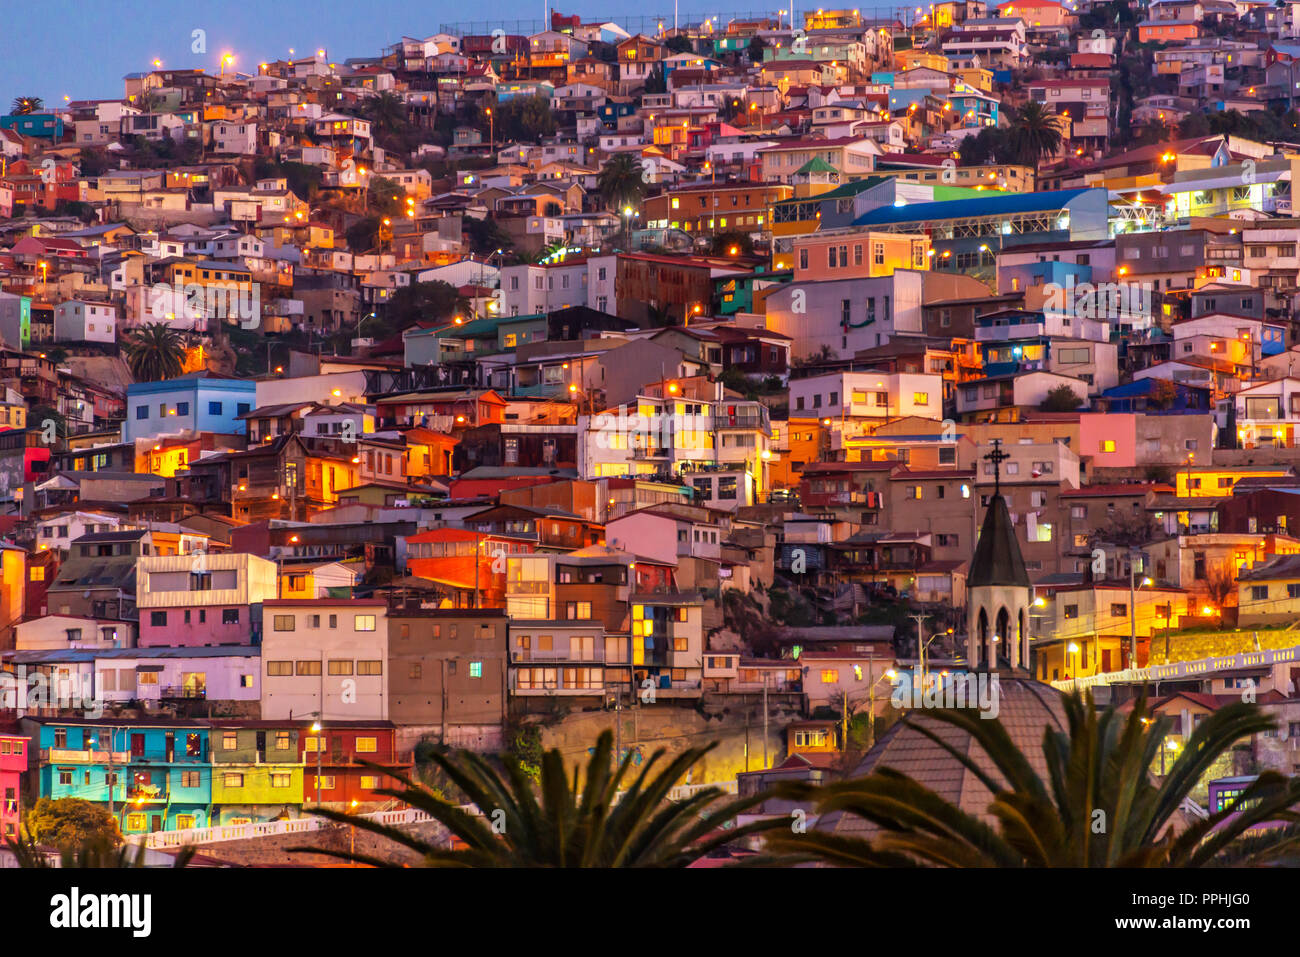 Colorful houses illuminated at night on a hill of Valparaiso, Chile Stock Photo